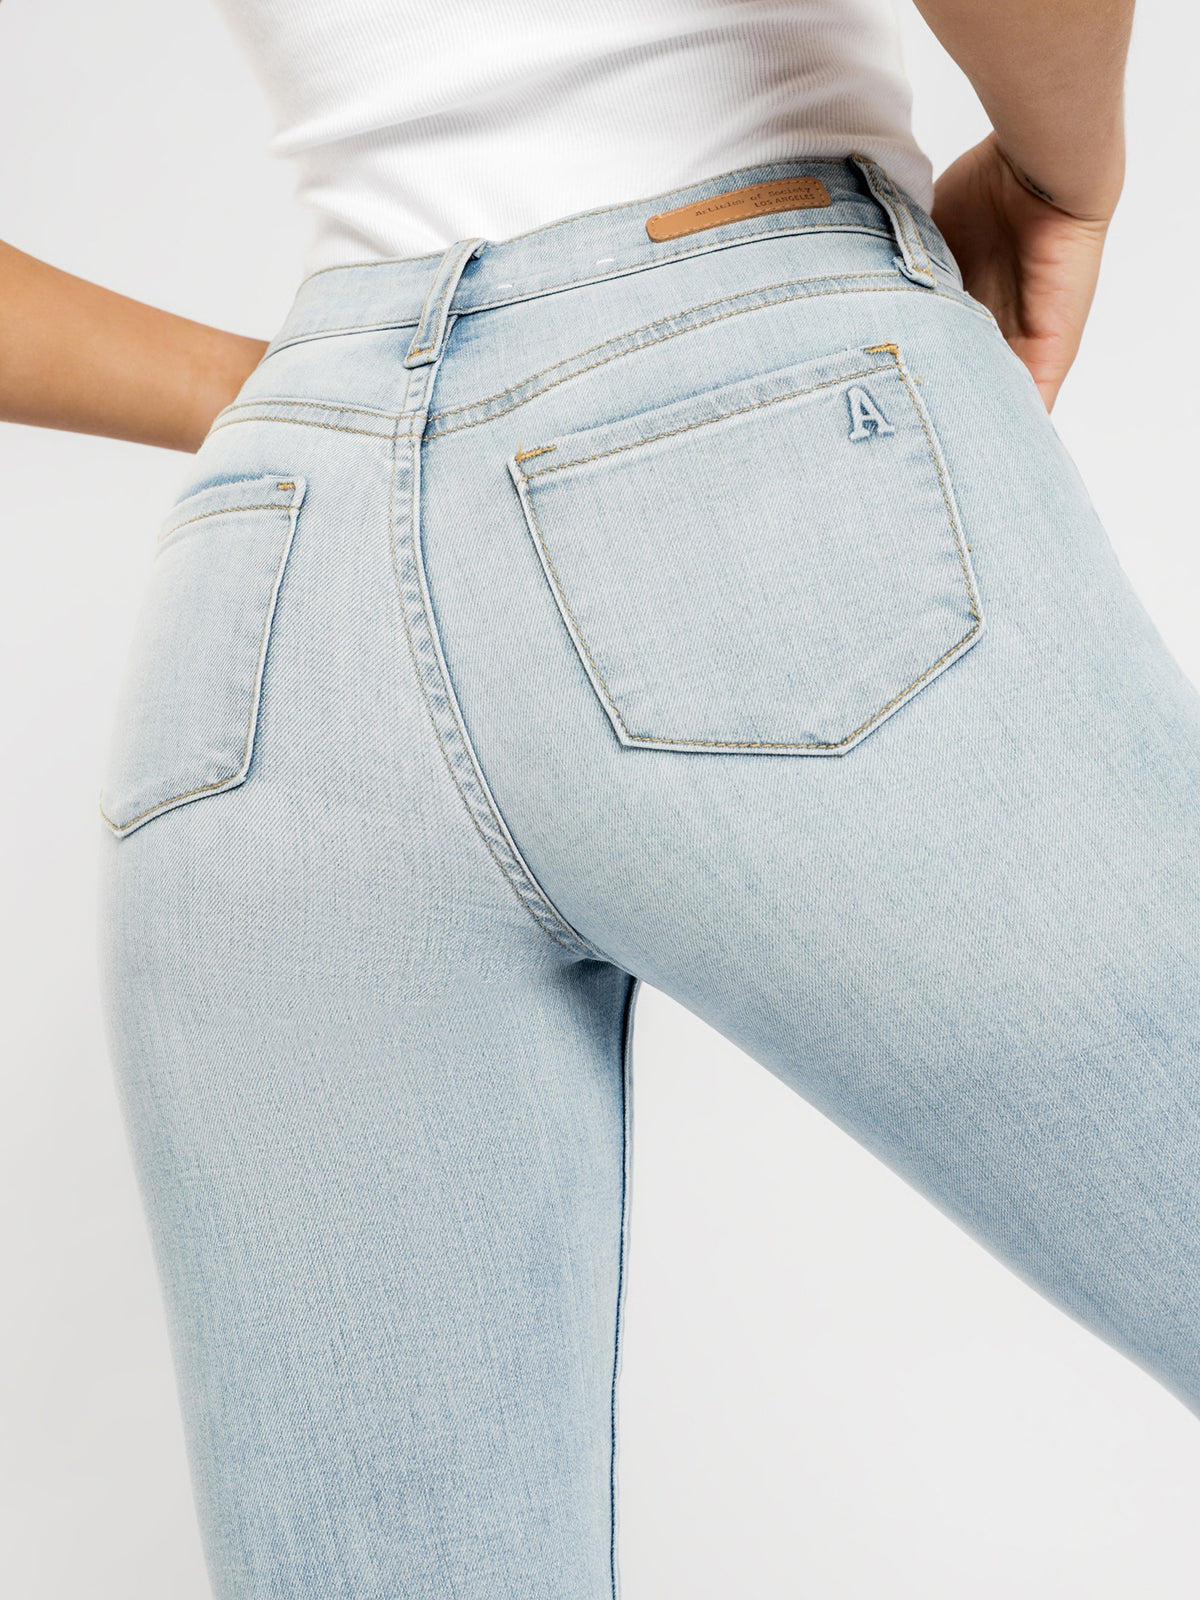 High Sarah Skinny Jeans in Summer Blues